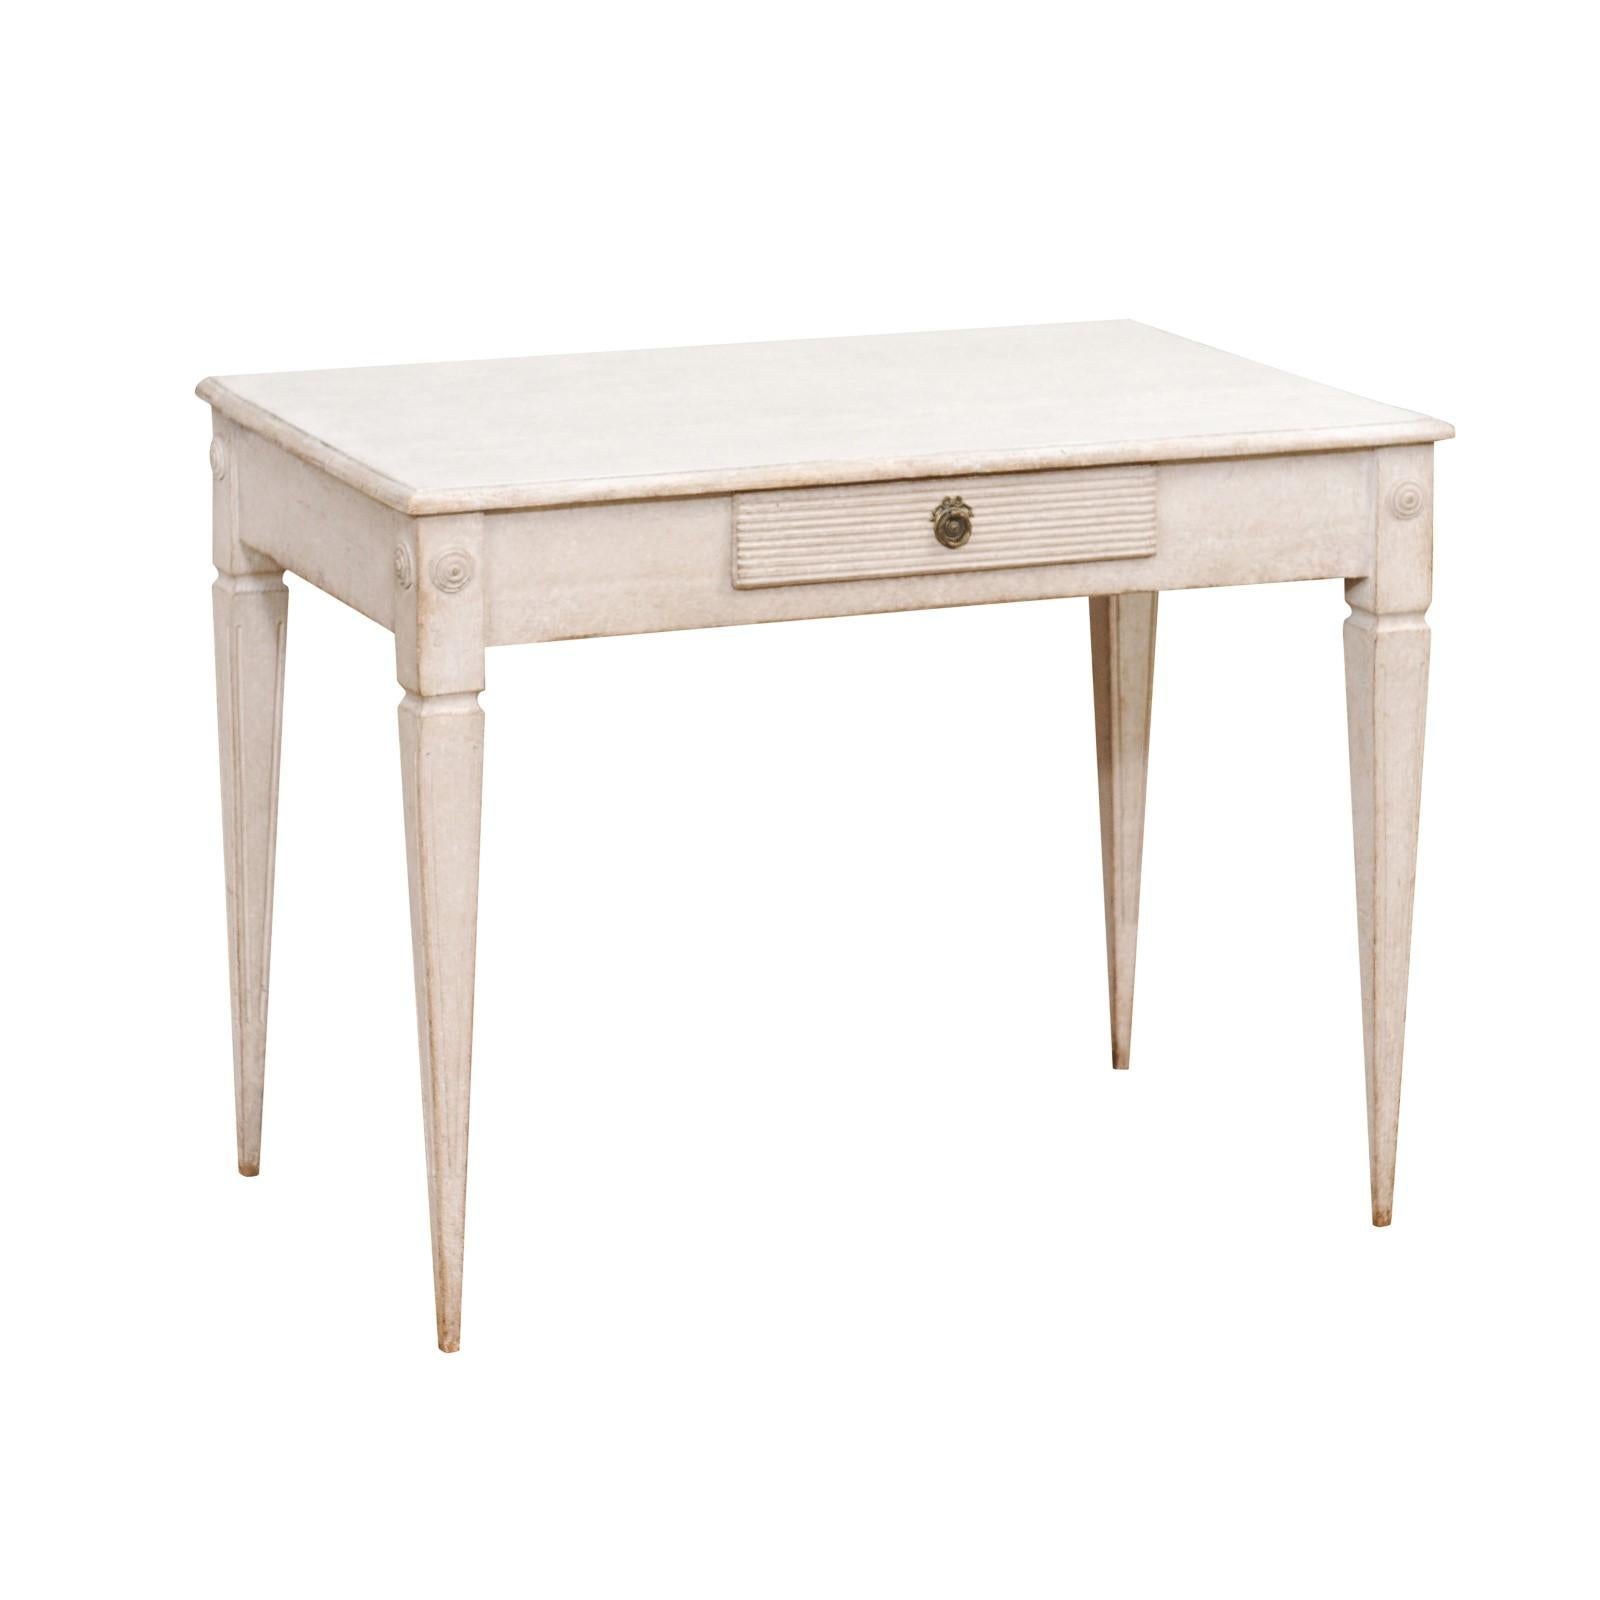 A Swedish Gustavian style writing table from circa 1900 with light gray painted finish, single drawer and tapered legs. This Swedish Gustavian style writing table, dating back to around 1900, exudes an air of timeless elegance with its light gray